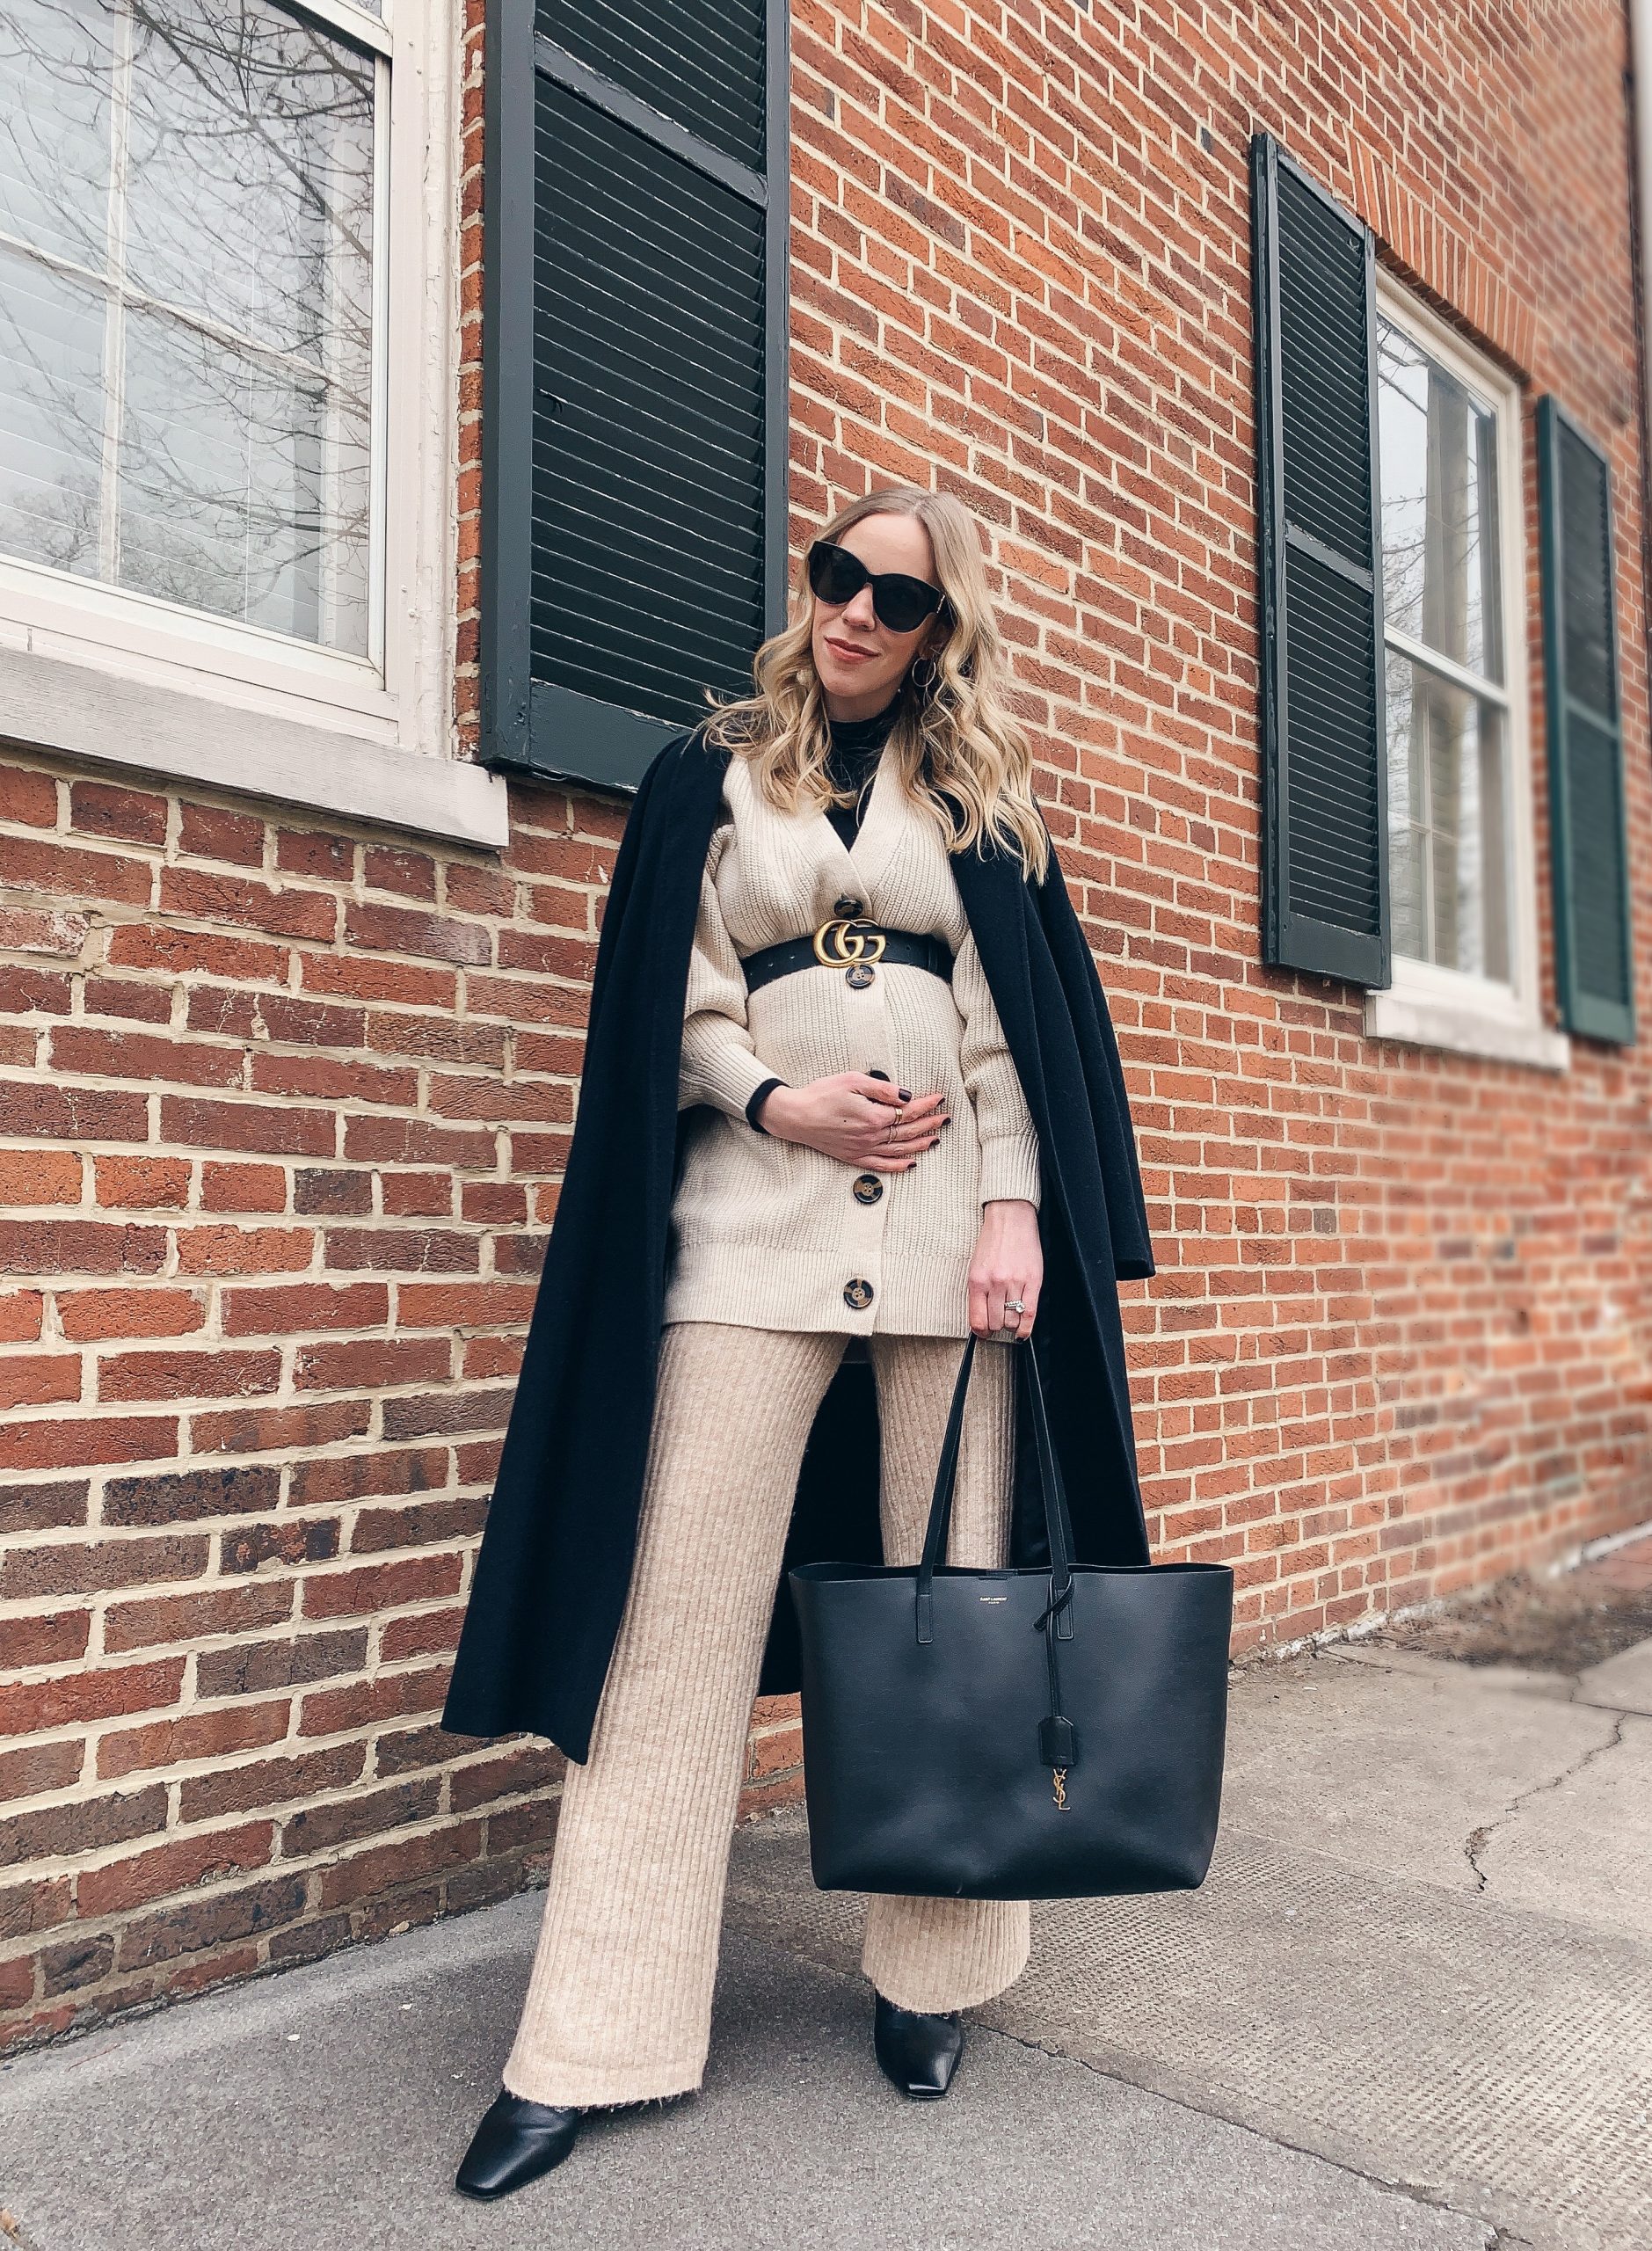 Gucci Belt Maternity Outfit Ideas for All Seasons - Meagan's Moda